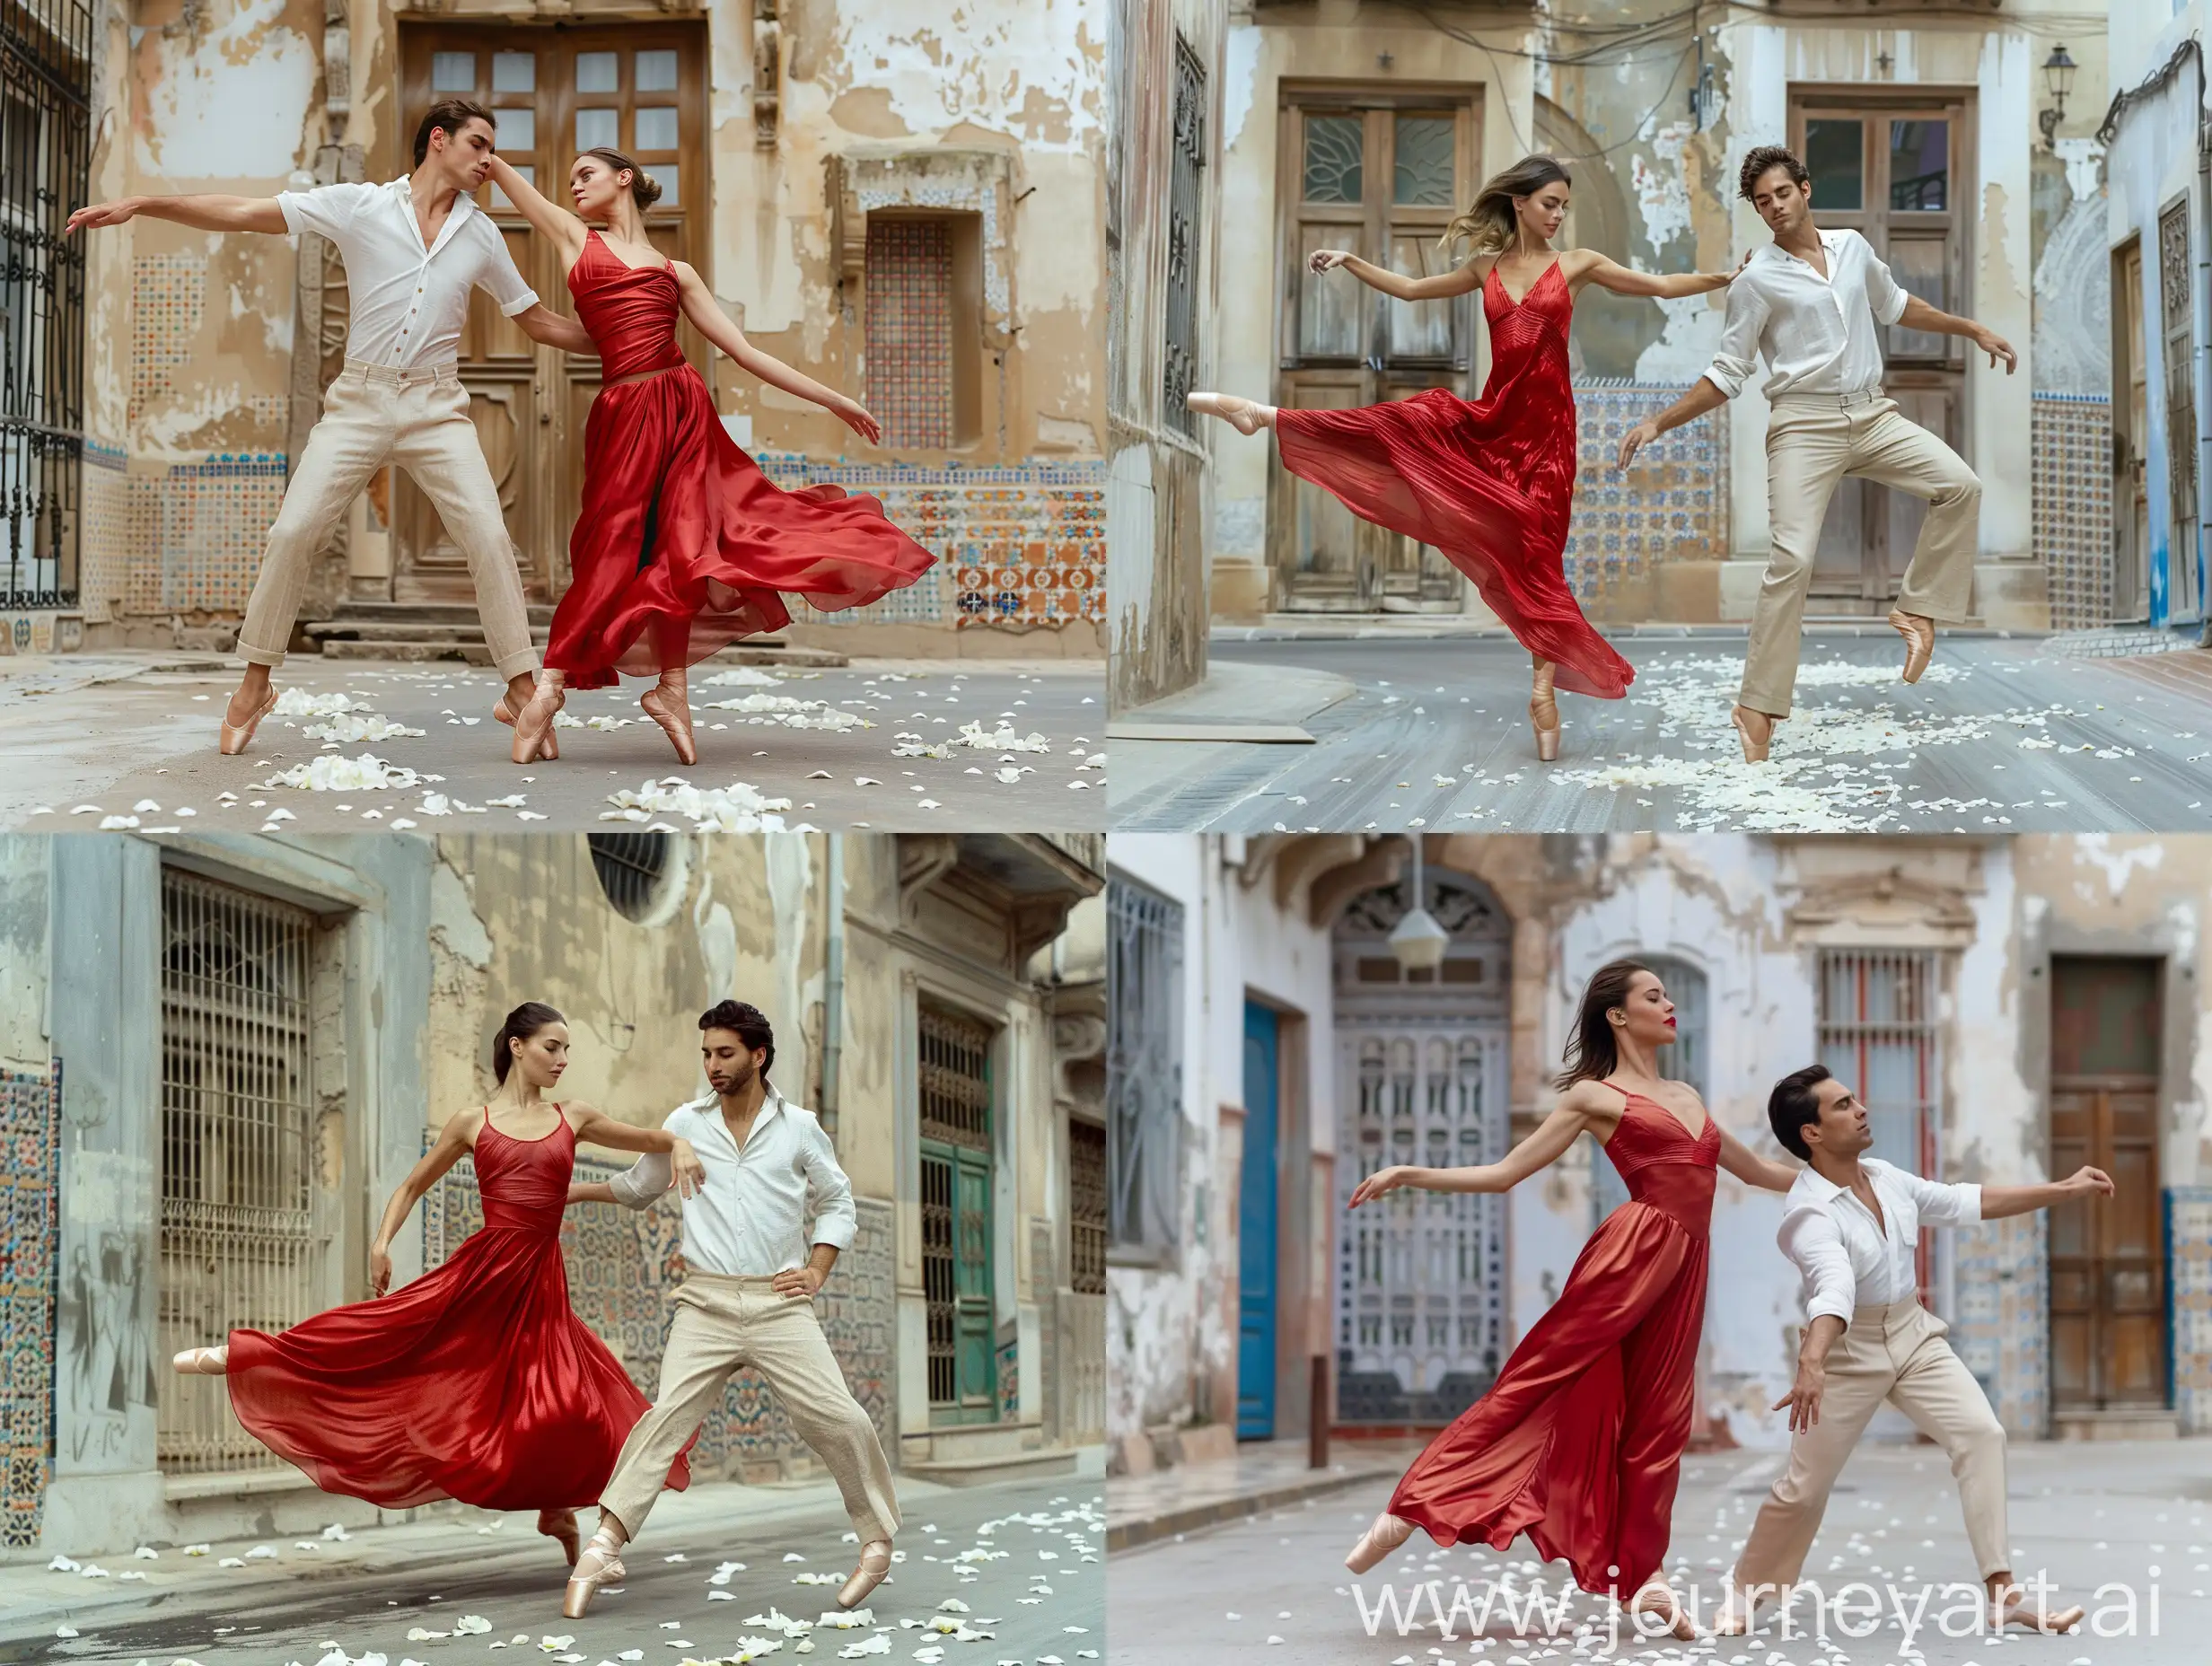 Poetic-Pastel-Ballet-Graceful-Dance-in-Front-of-French-Building-with-Tunisian-Tiles